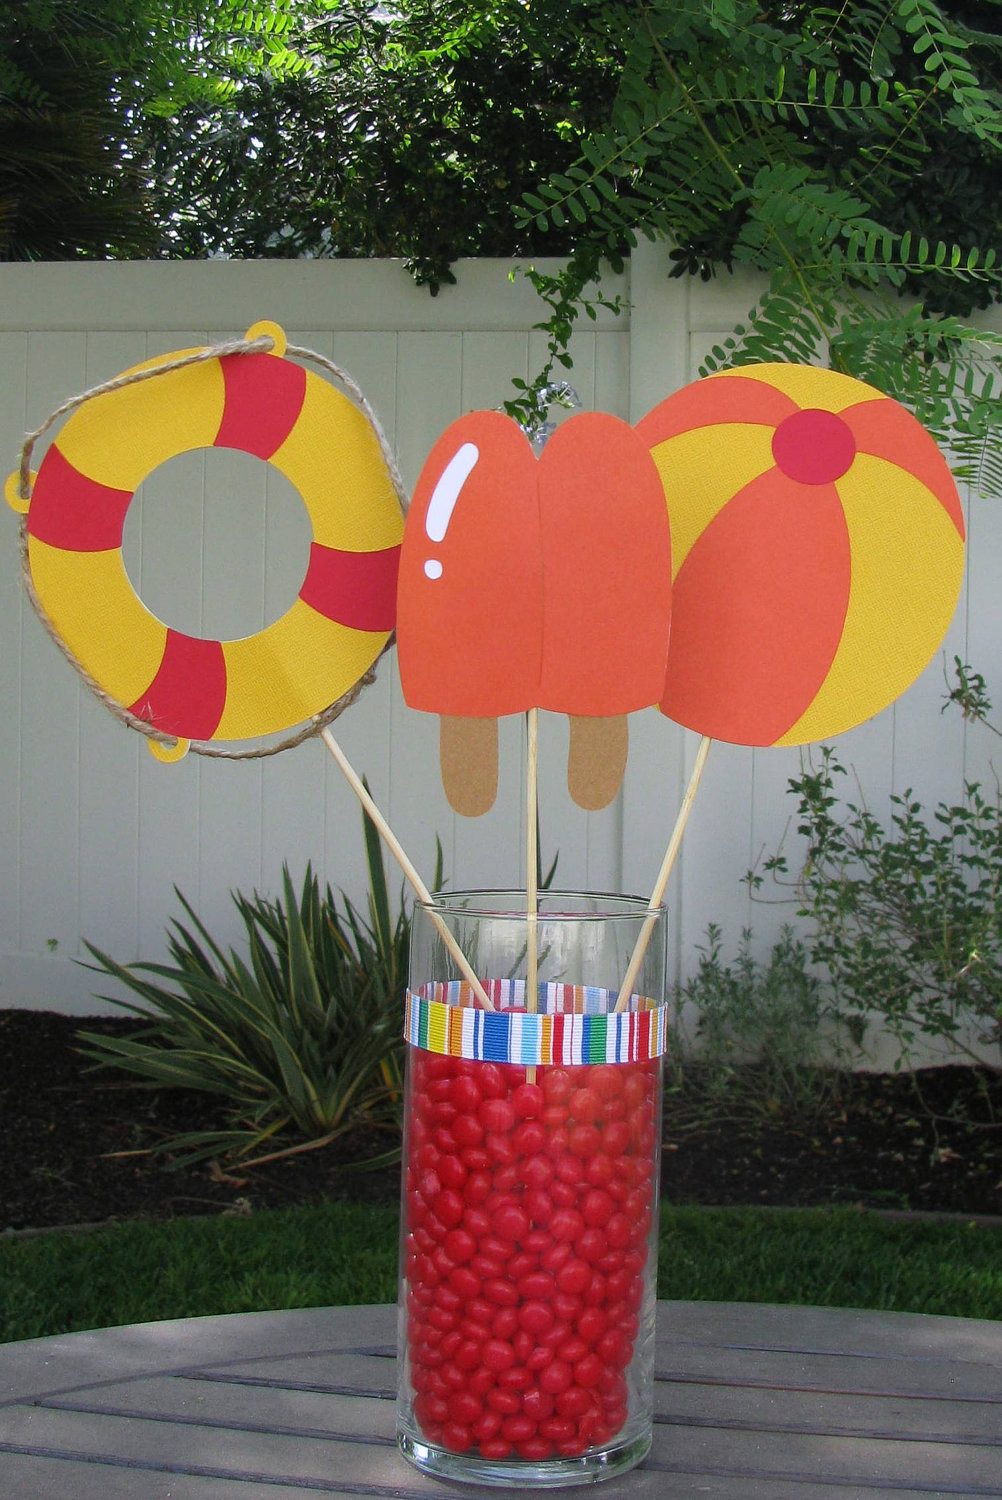 Poolside Party Decoration Ideas
 Pool Party Table Decorations Set of 3 MADE TO ORDER